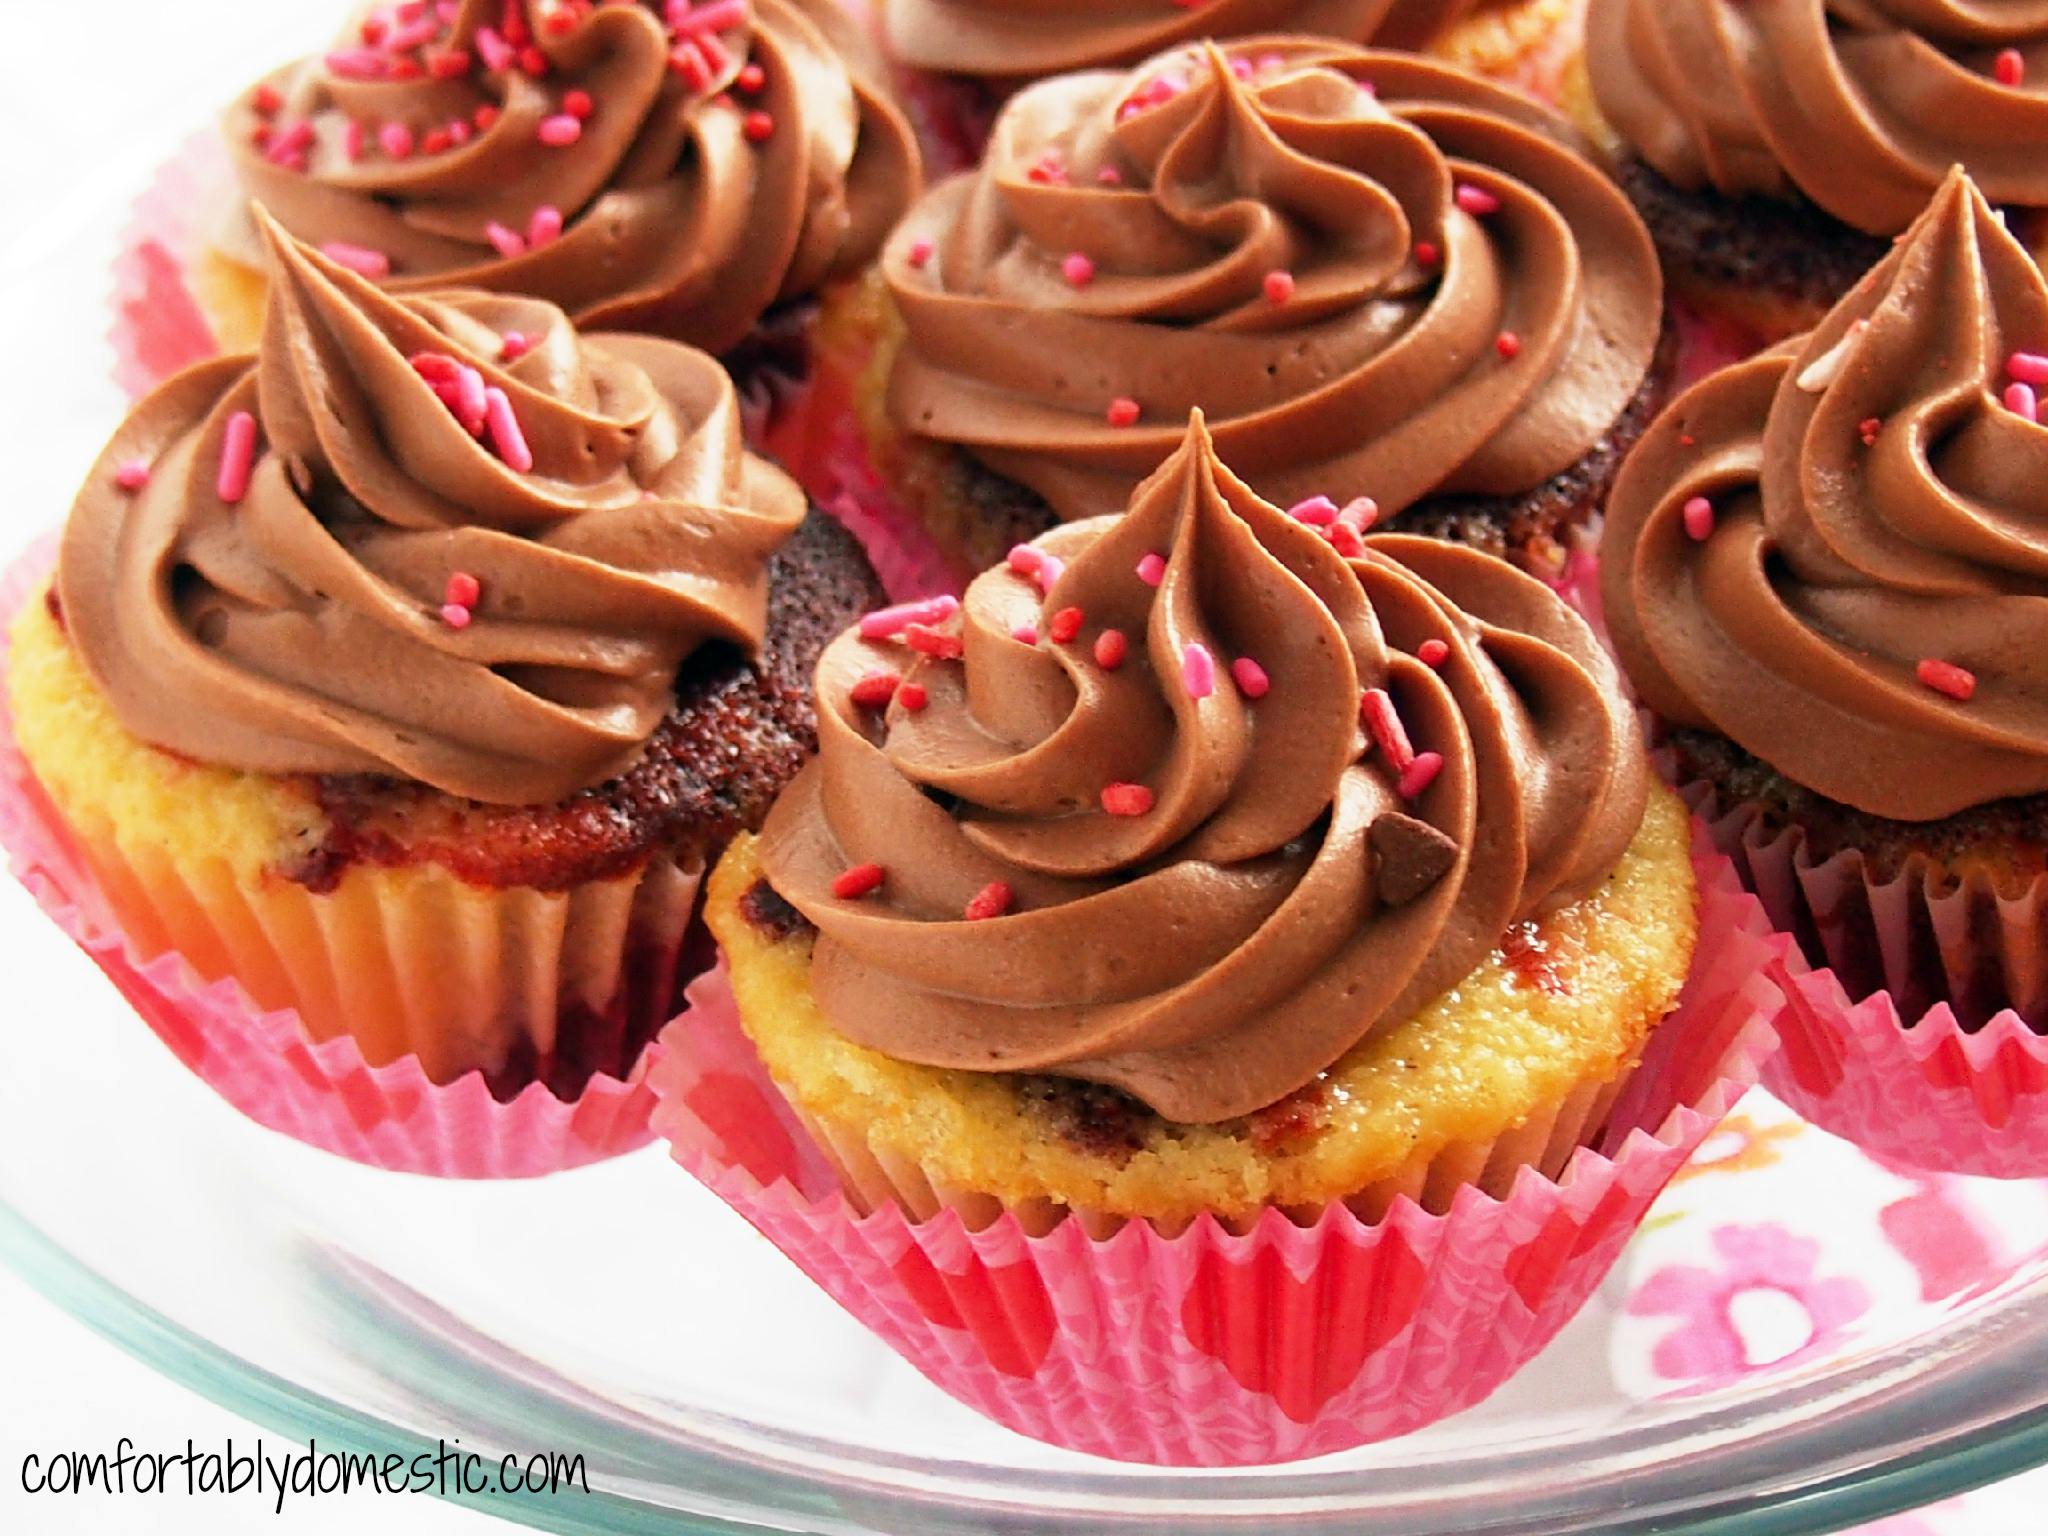 Red Velvet Vanilla Marble Cupcakes are a delicious combination of red velvet cake, marbled with moist vanilla cake. Topped with creamy, rich milk chocolate buttercream frosting. | ComfortablyDomestic.com